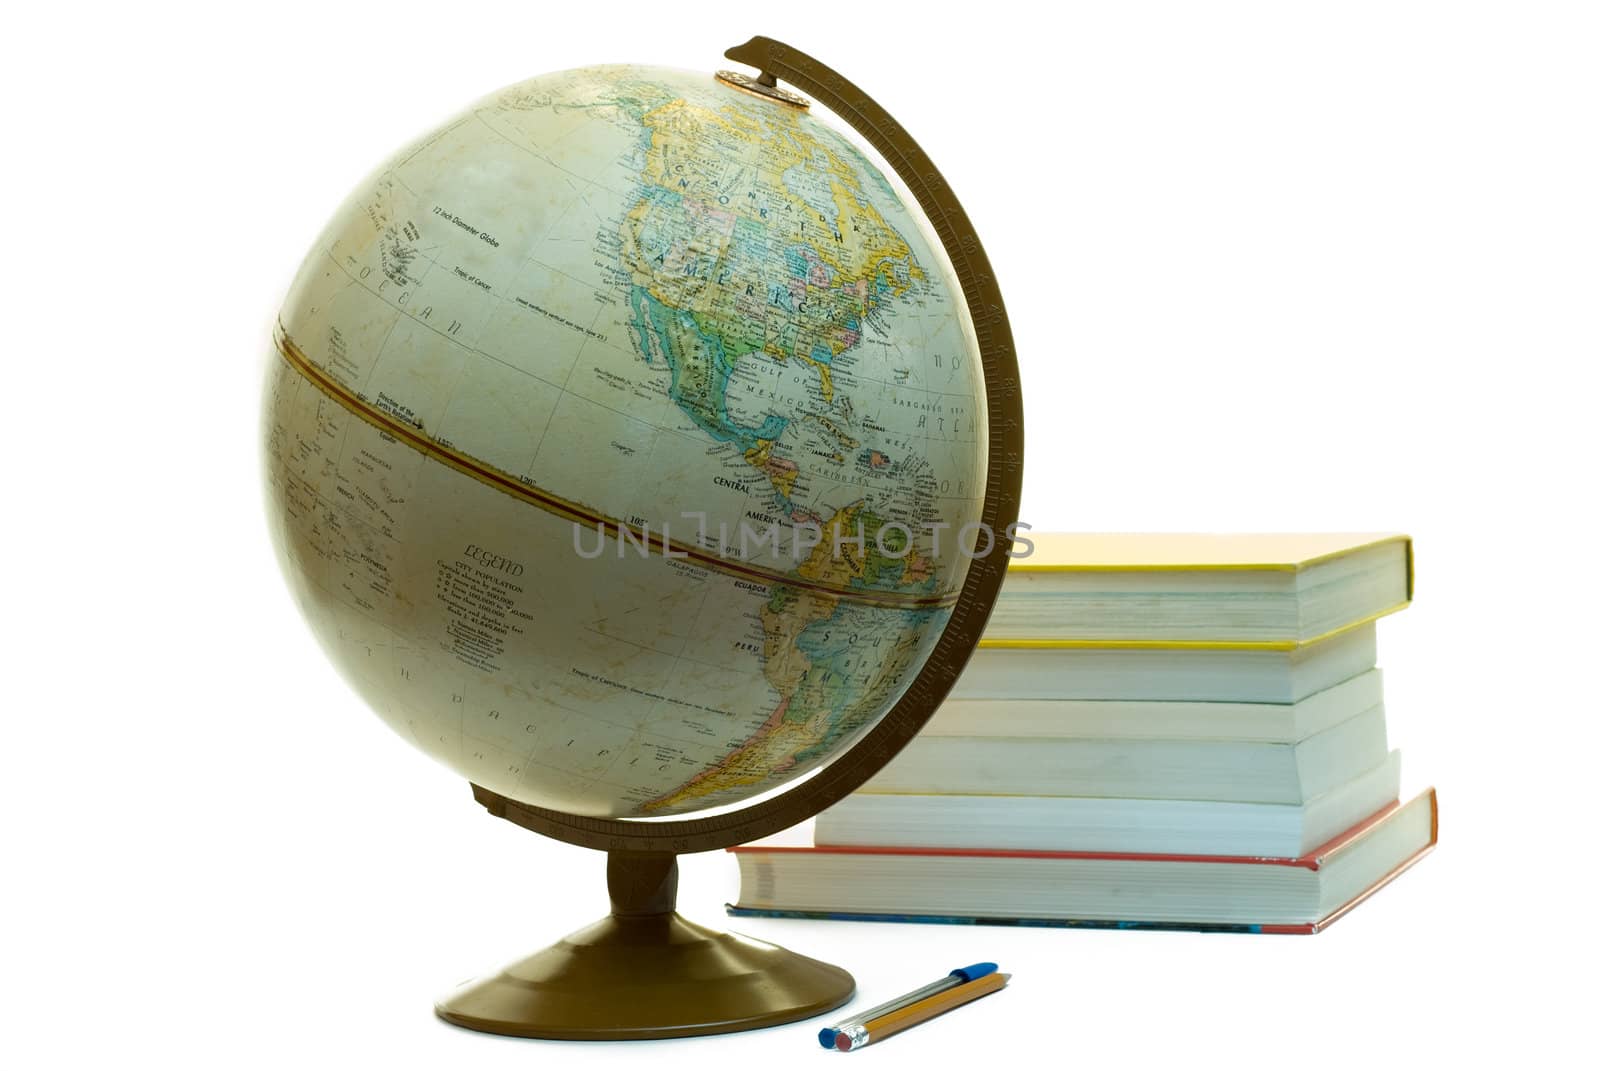 Assorted school supplies for a college student, including a globe, some text books and a pen